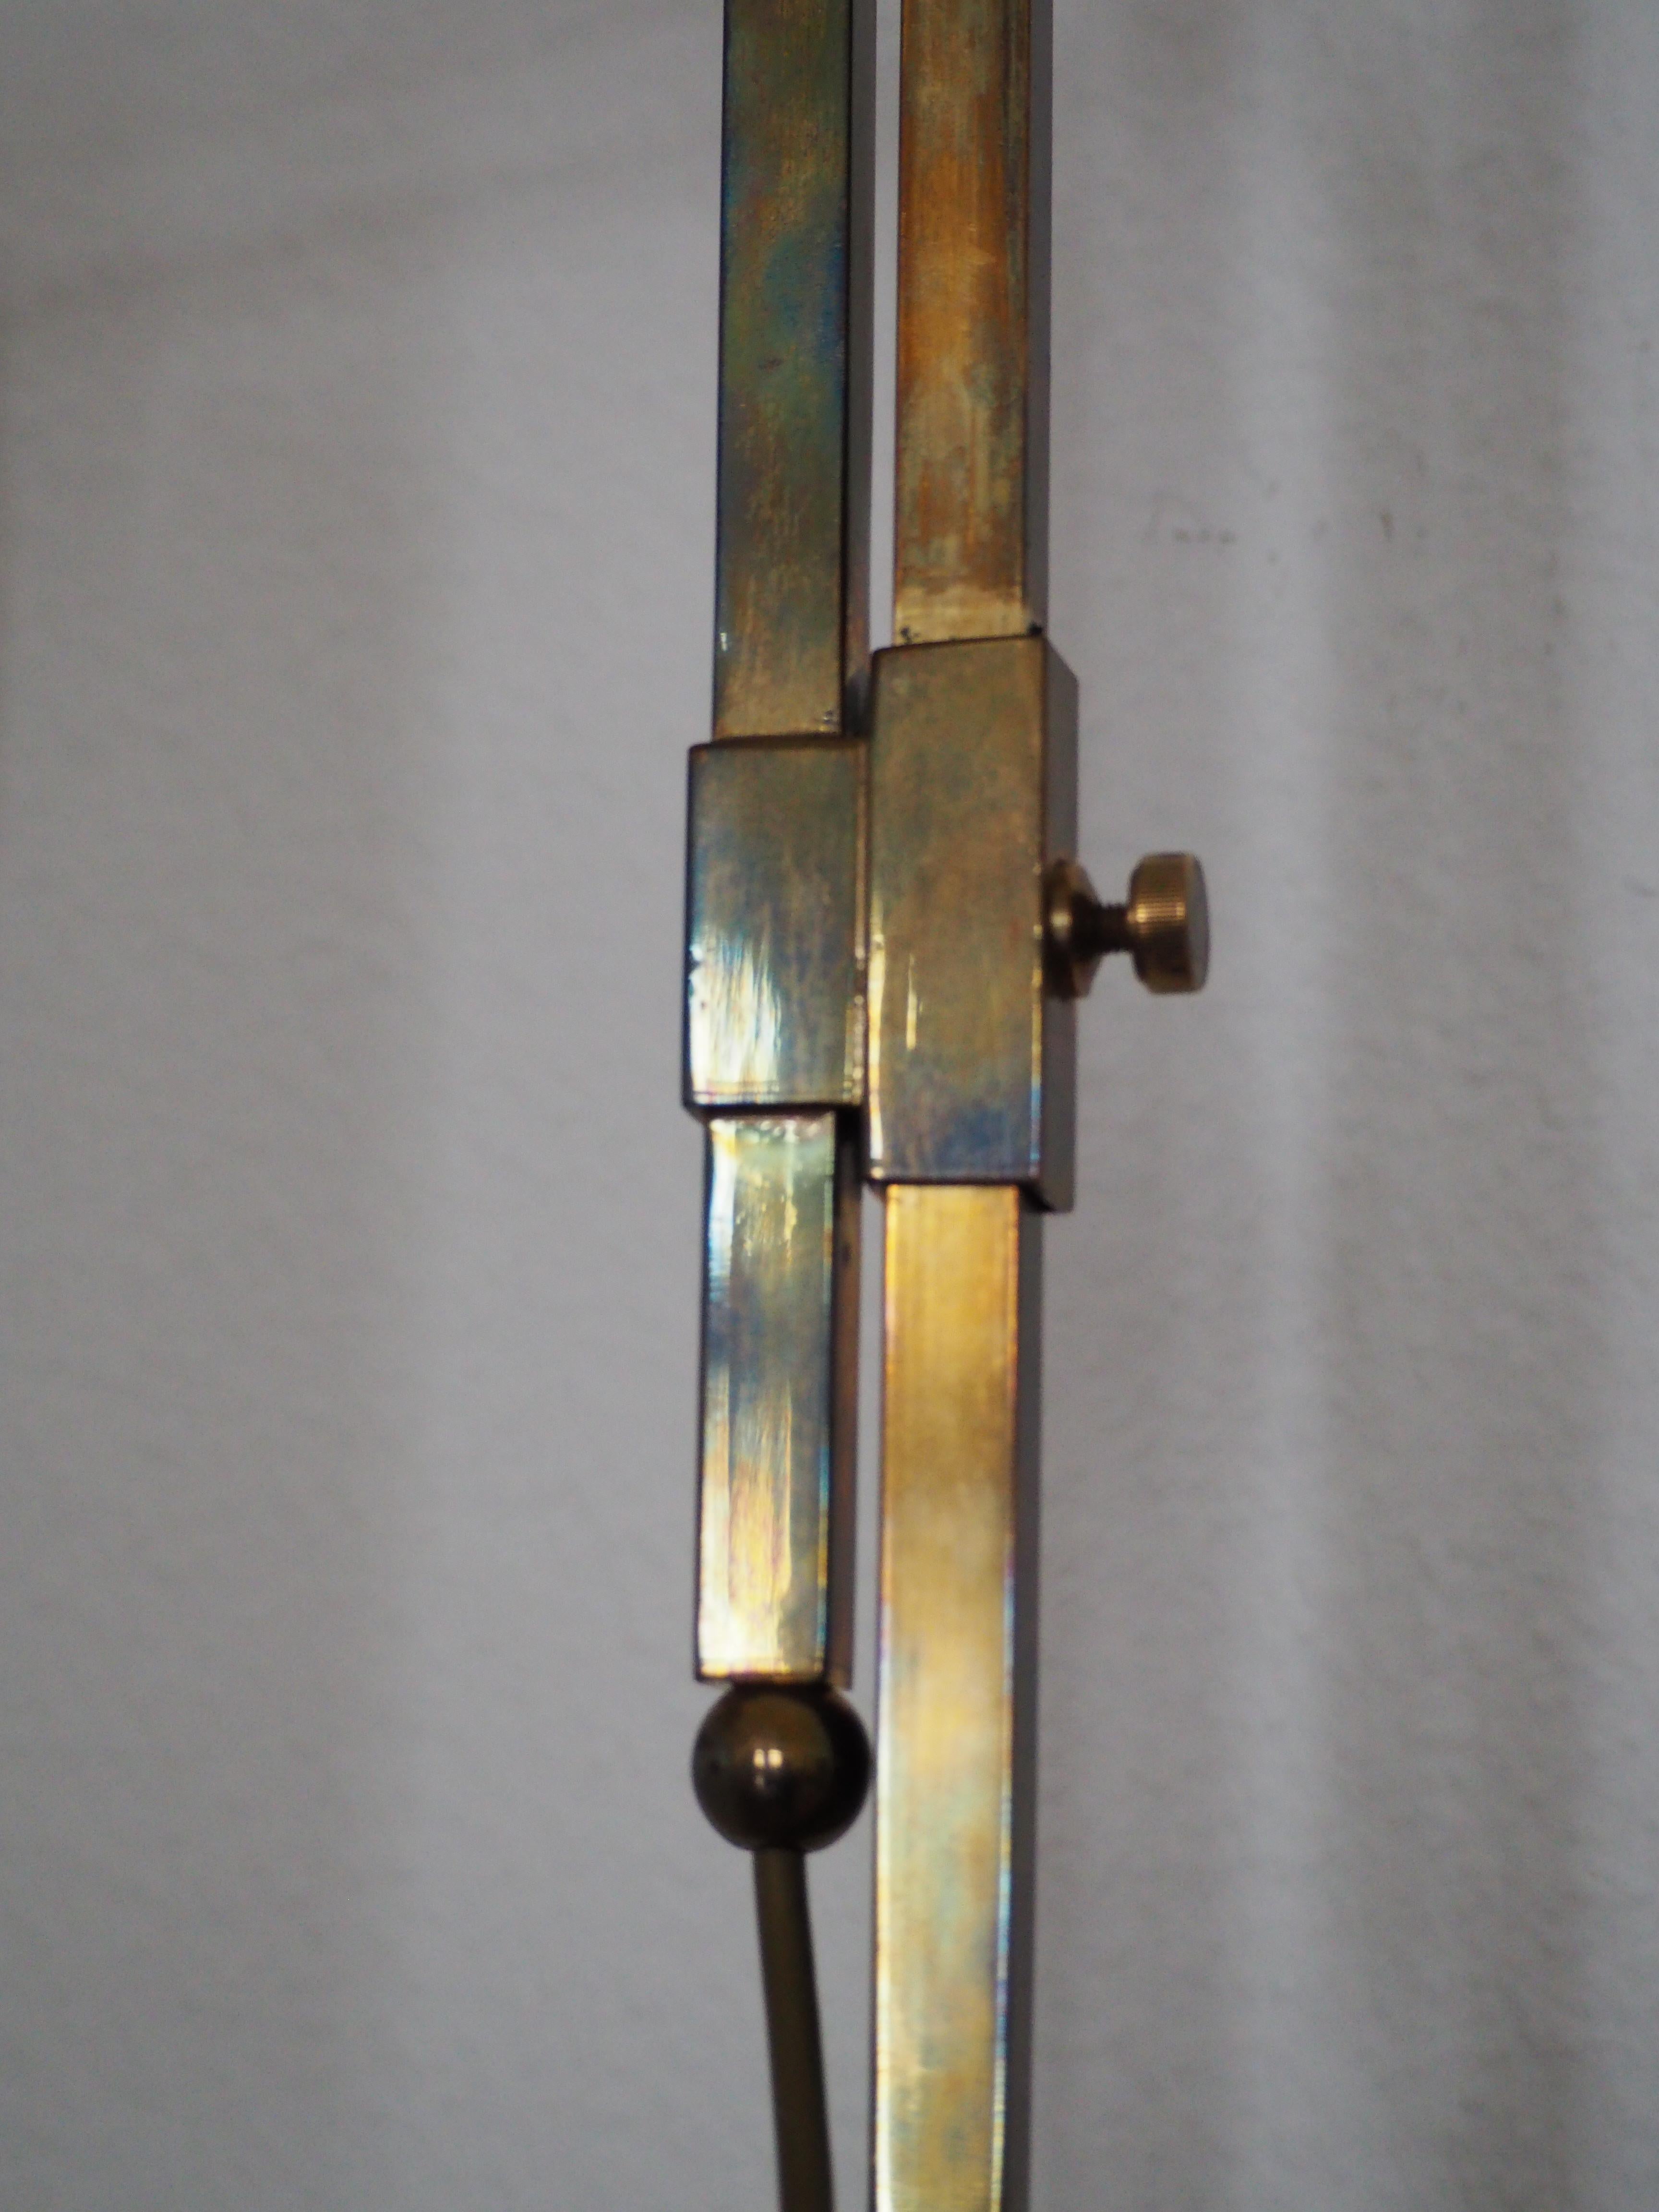 Late 20th Century Rare Brass and Glass Floor Lamp From Vienna, Koloman Moser, Otto Wagner Style